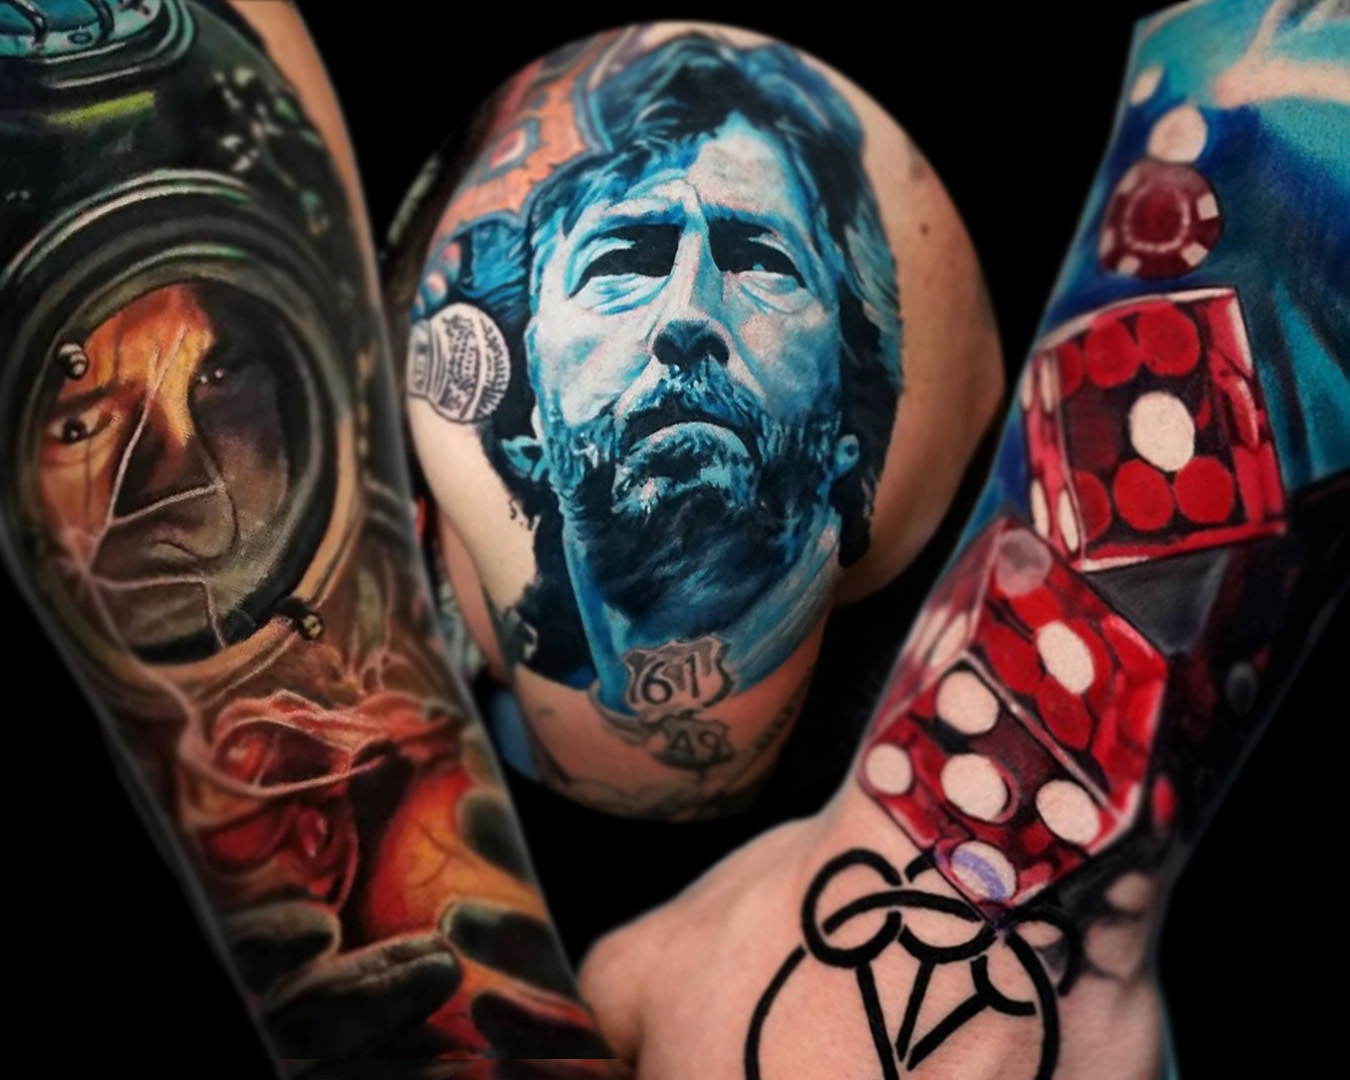 forearm tattoos by mattlock lopes. dice, eric clapton, and man drowning